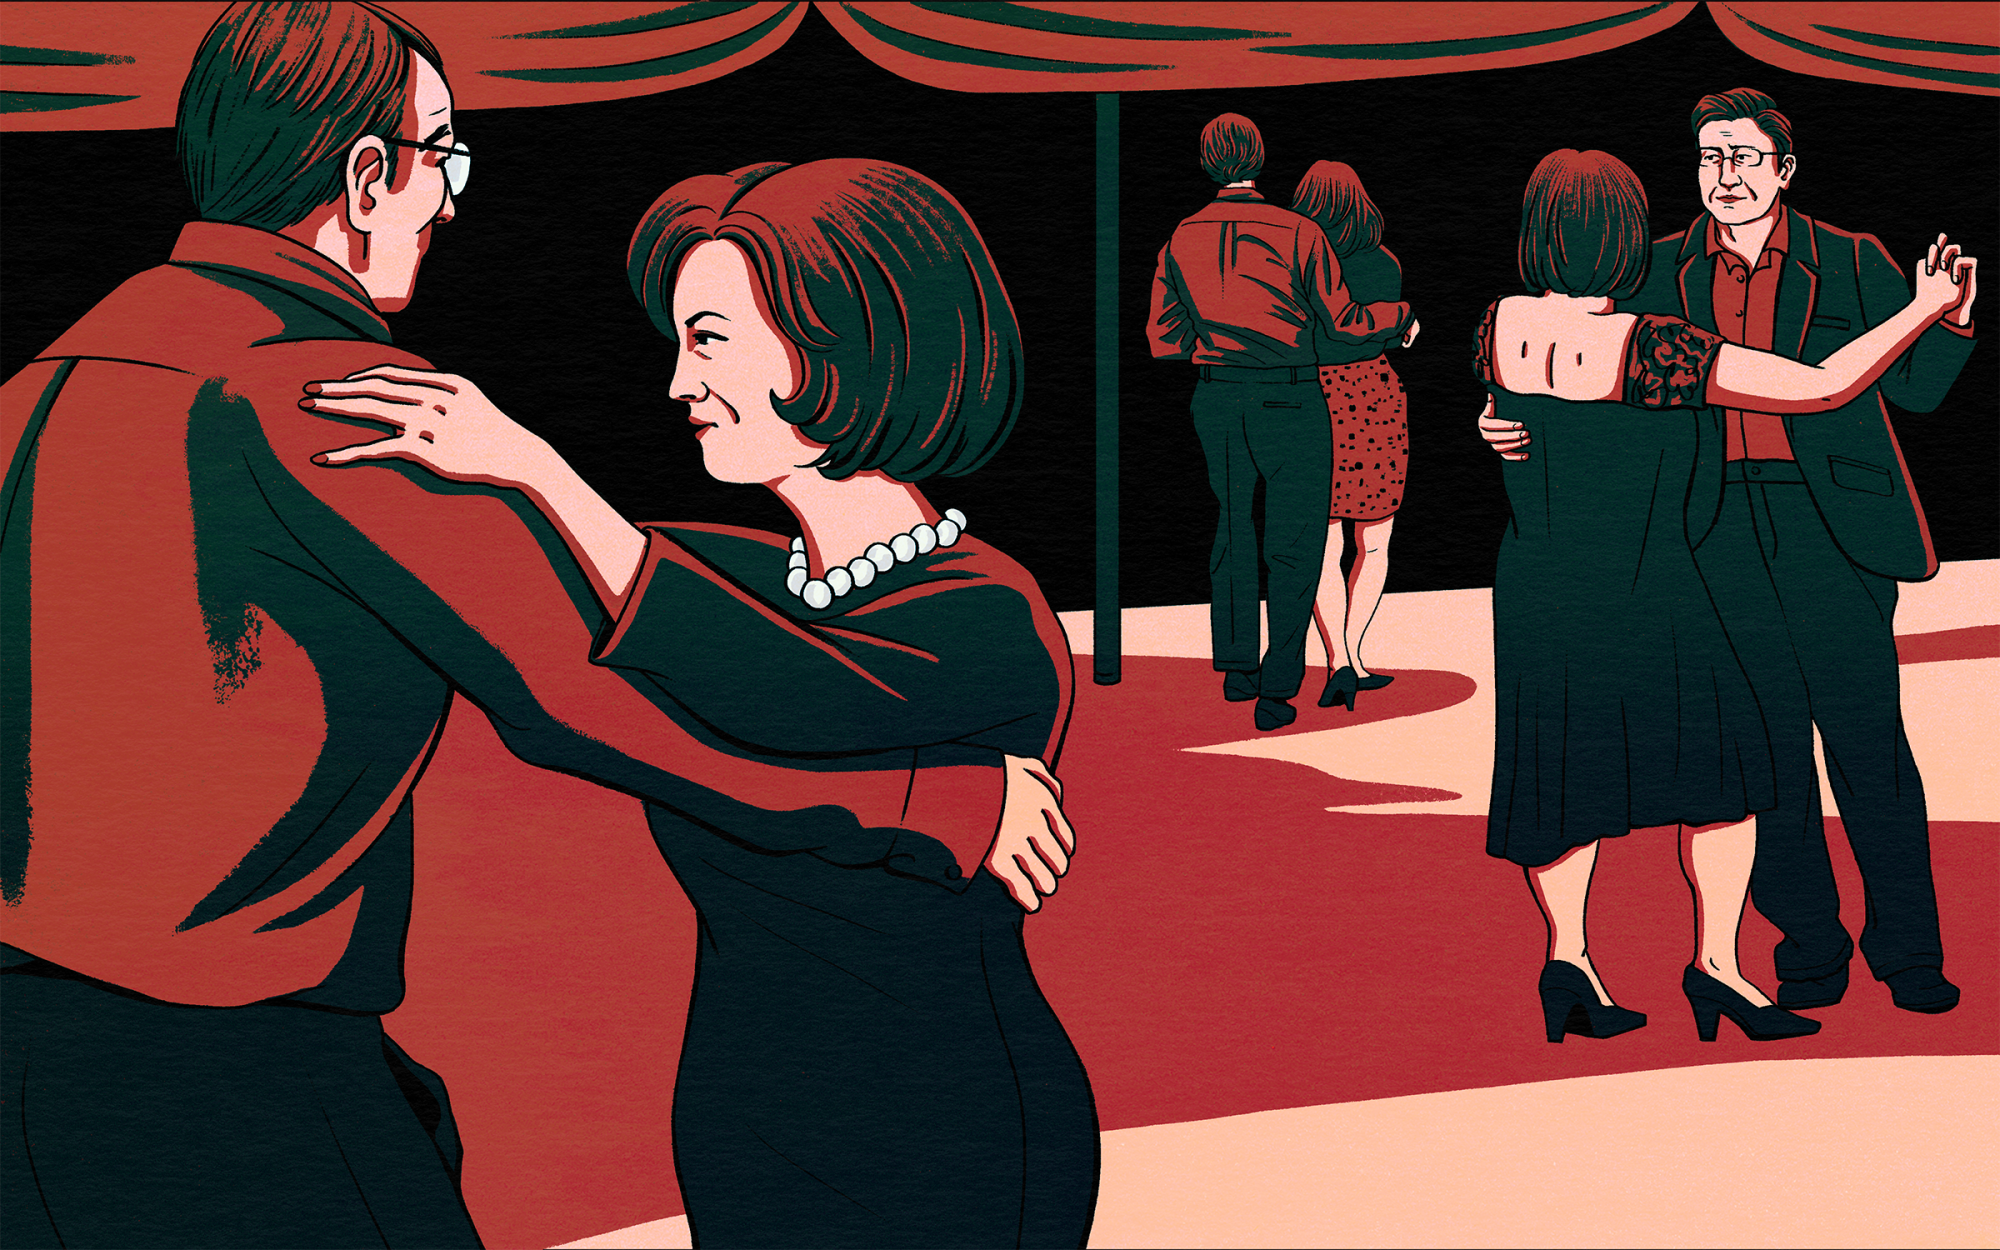 This is an illustration of Shally dancing in Star ballroom with friends.